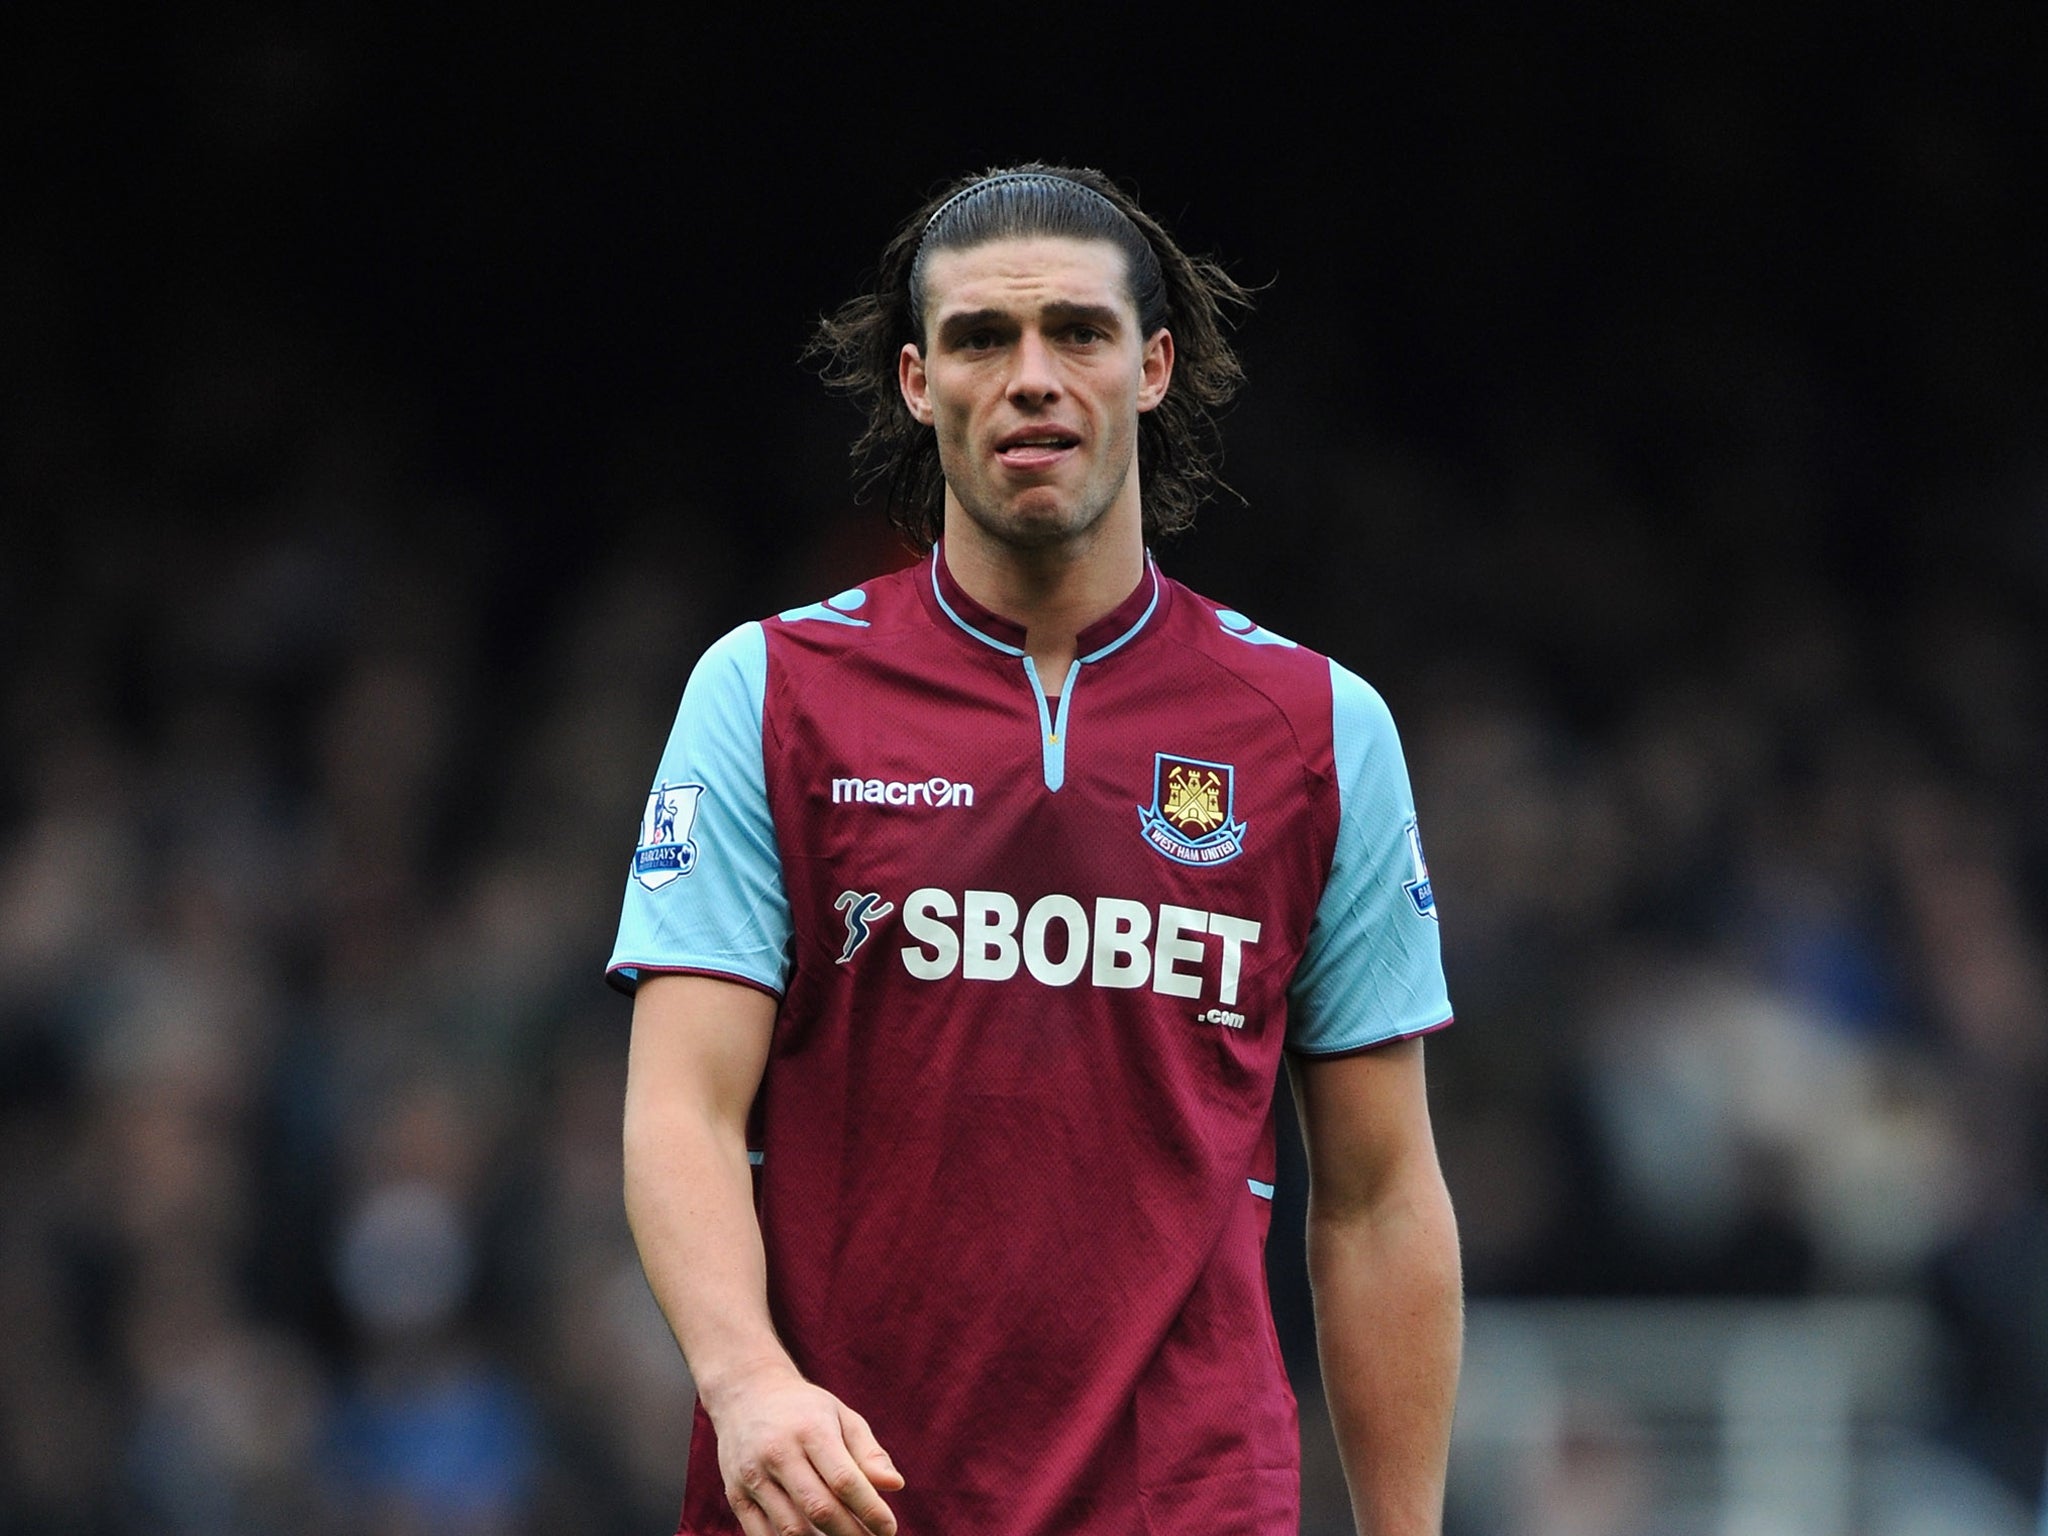 West Ham striker Andy Carroll is yet to play for the club since completing his £15m move from Liverpool